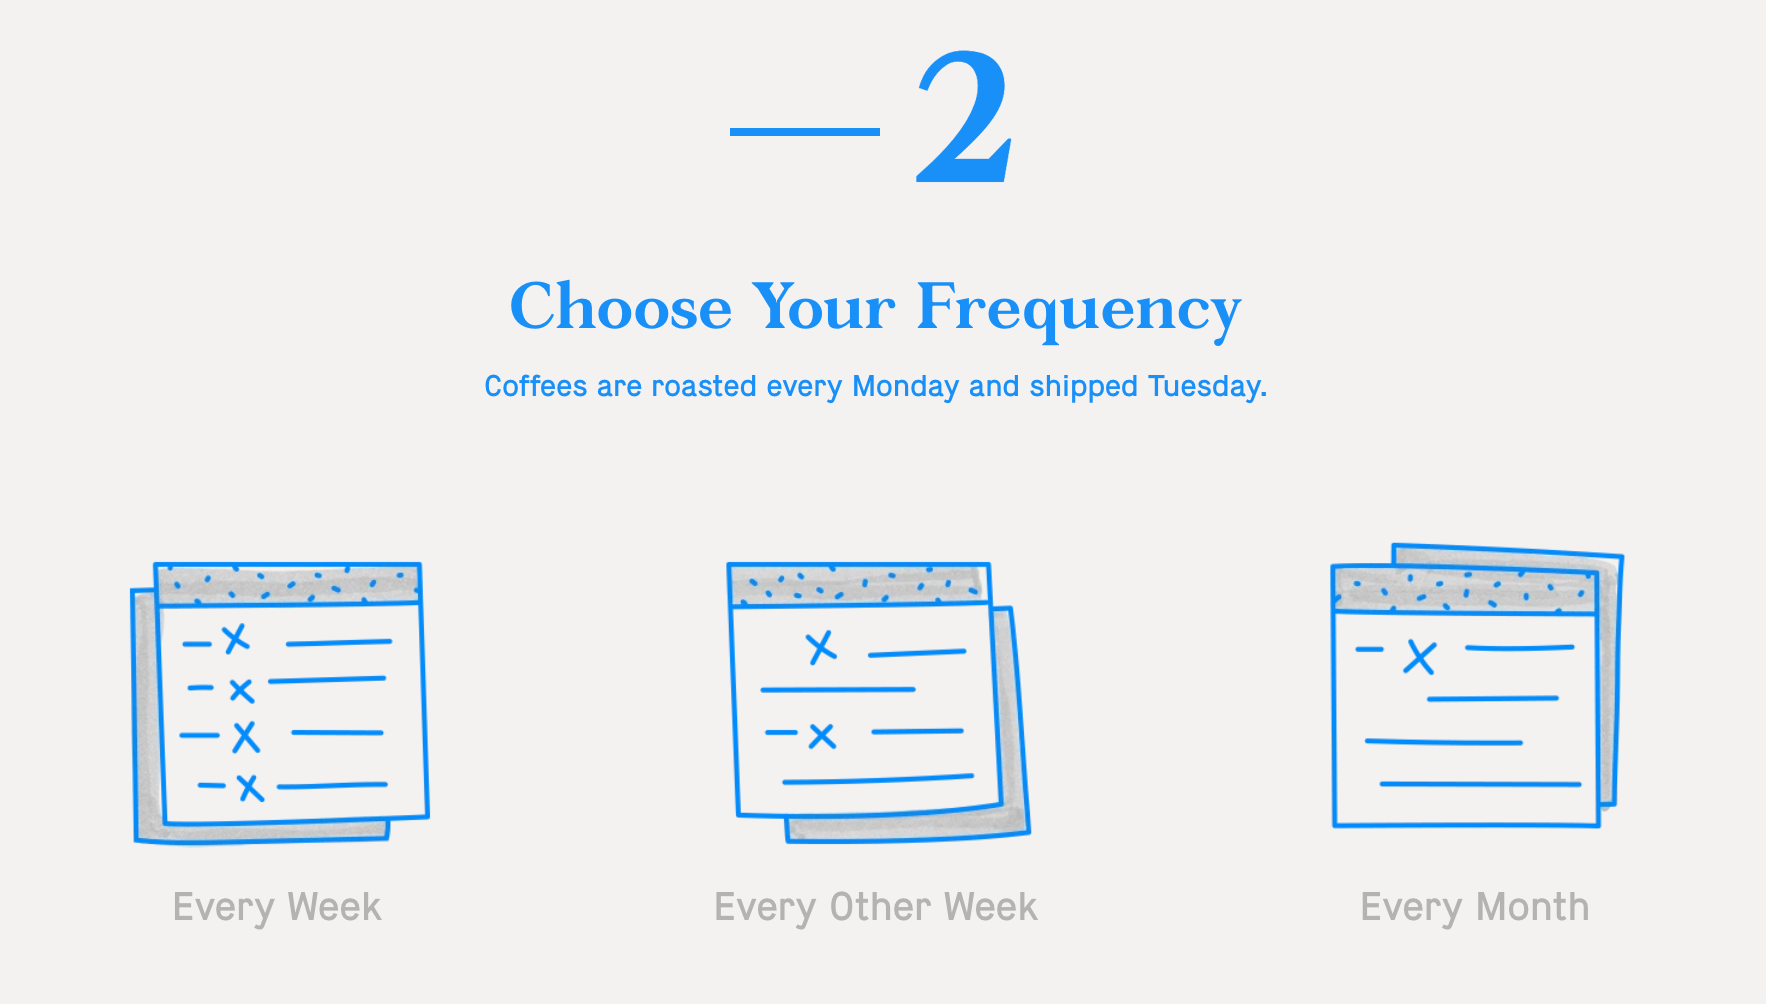 Hand-drawn "choose your frequency" graphic